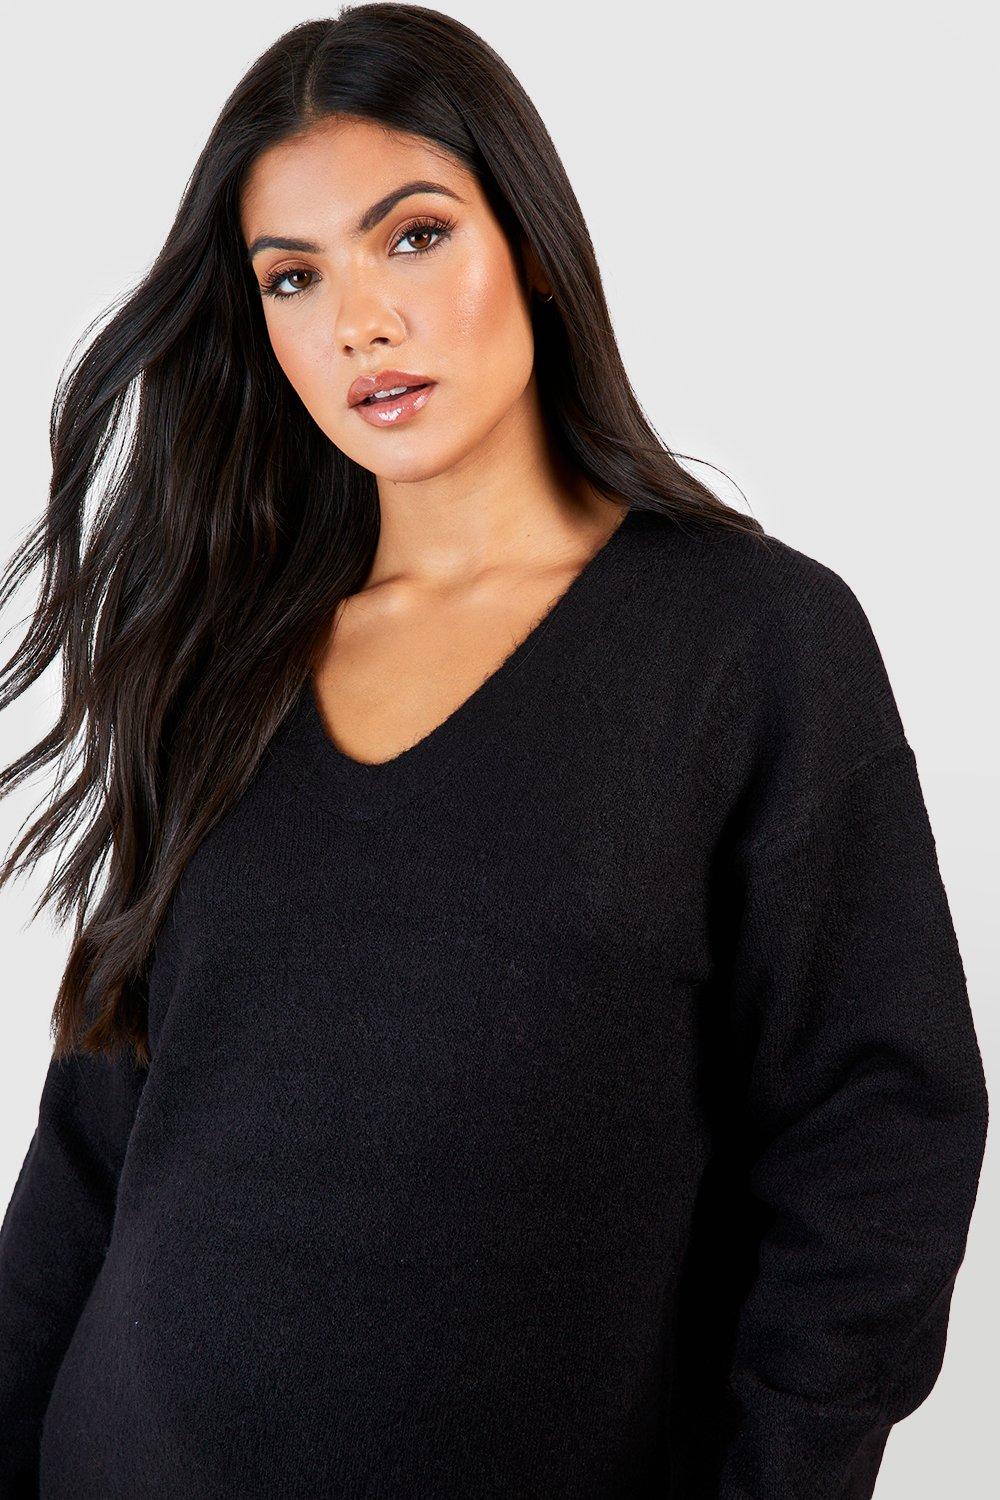 Buy Boohoo maternity knitted sweaters dress black Online